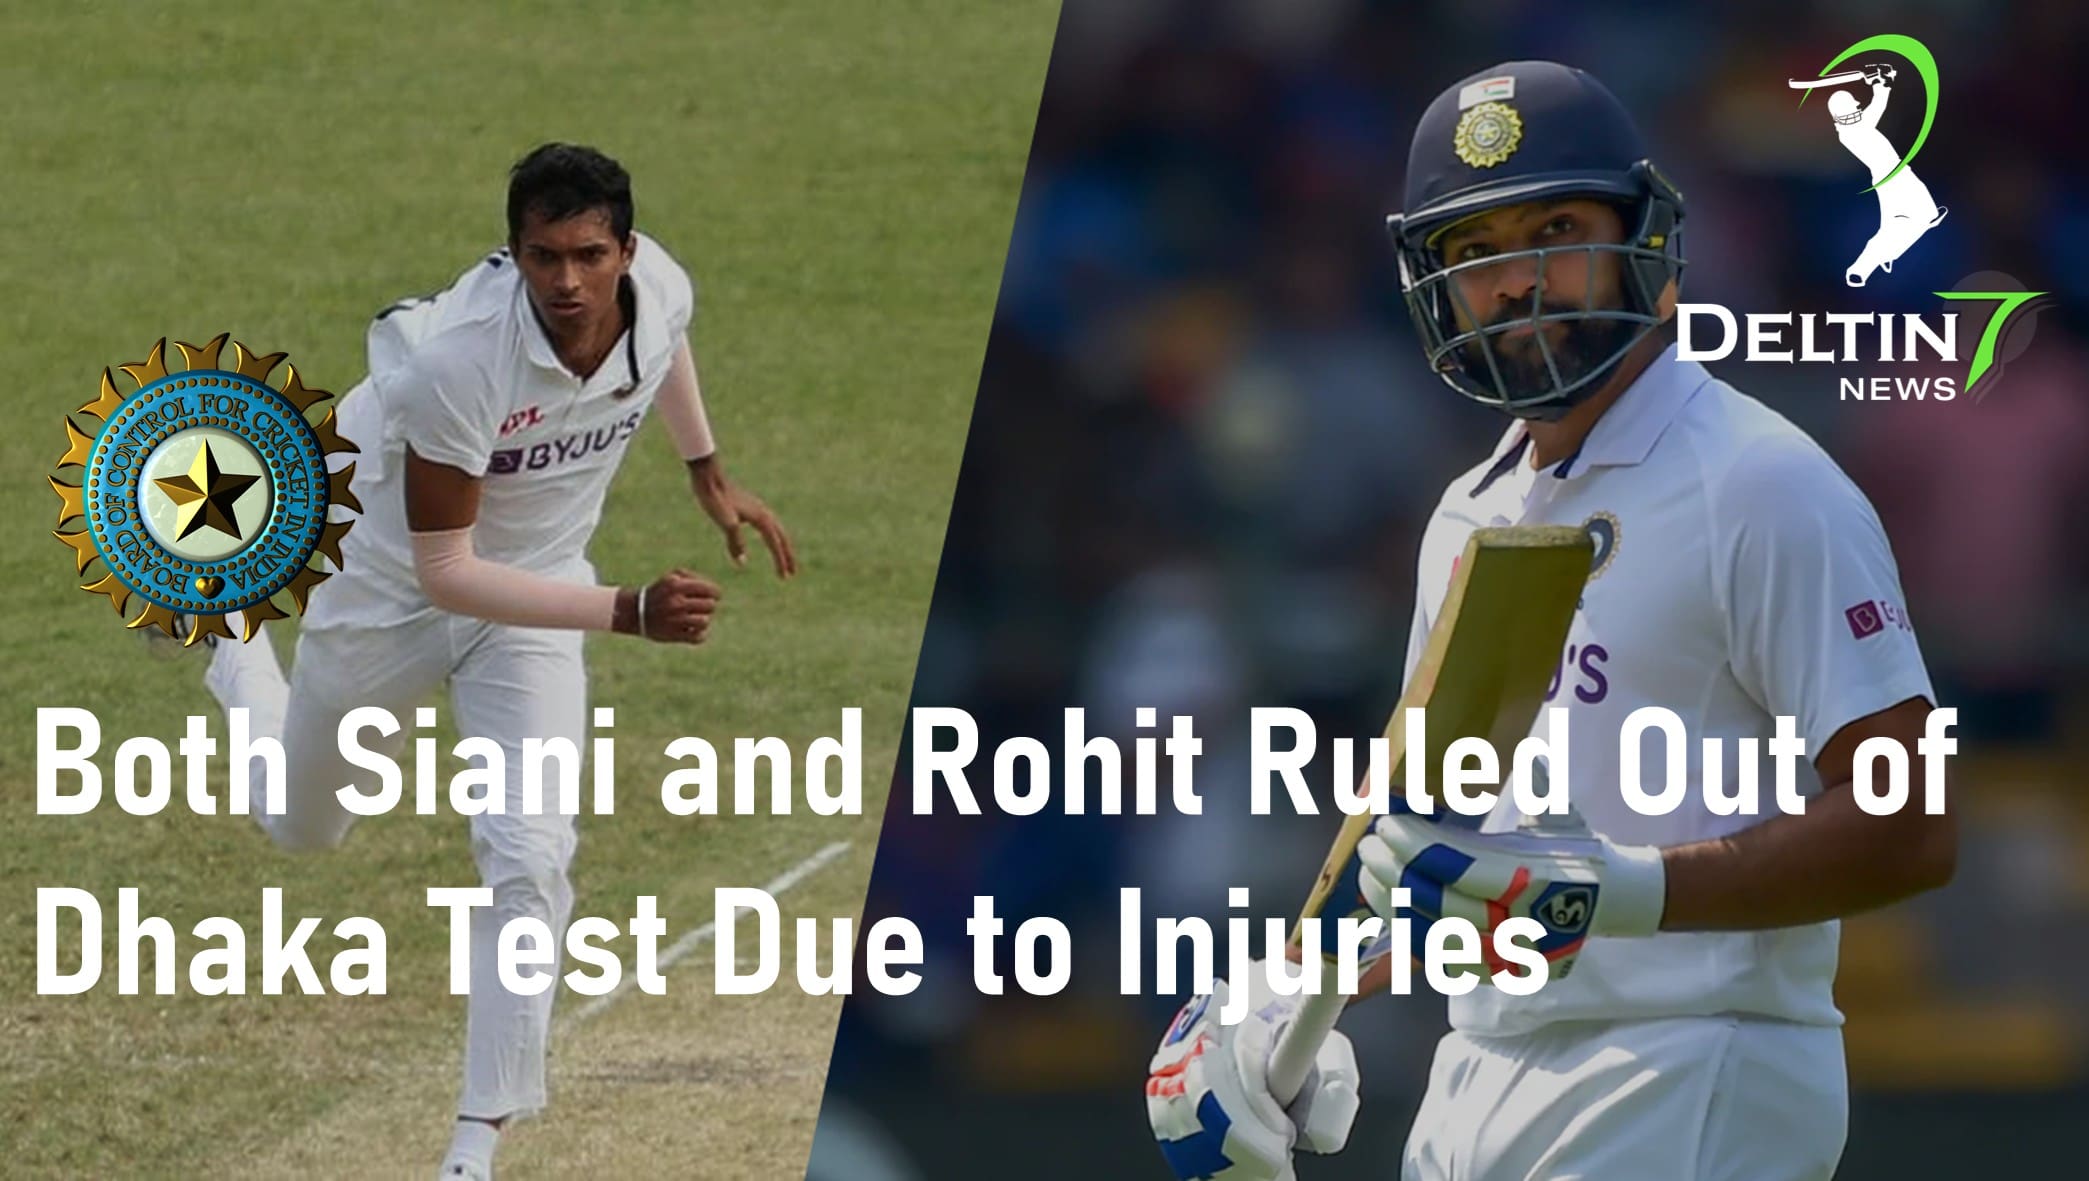 Both Siani and Rohit Ruled Out of Dhaka Test Due to Injuries